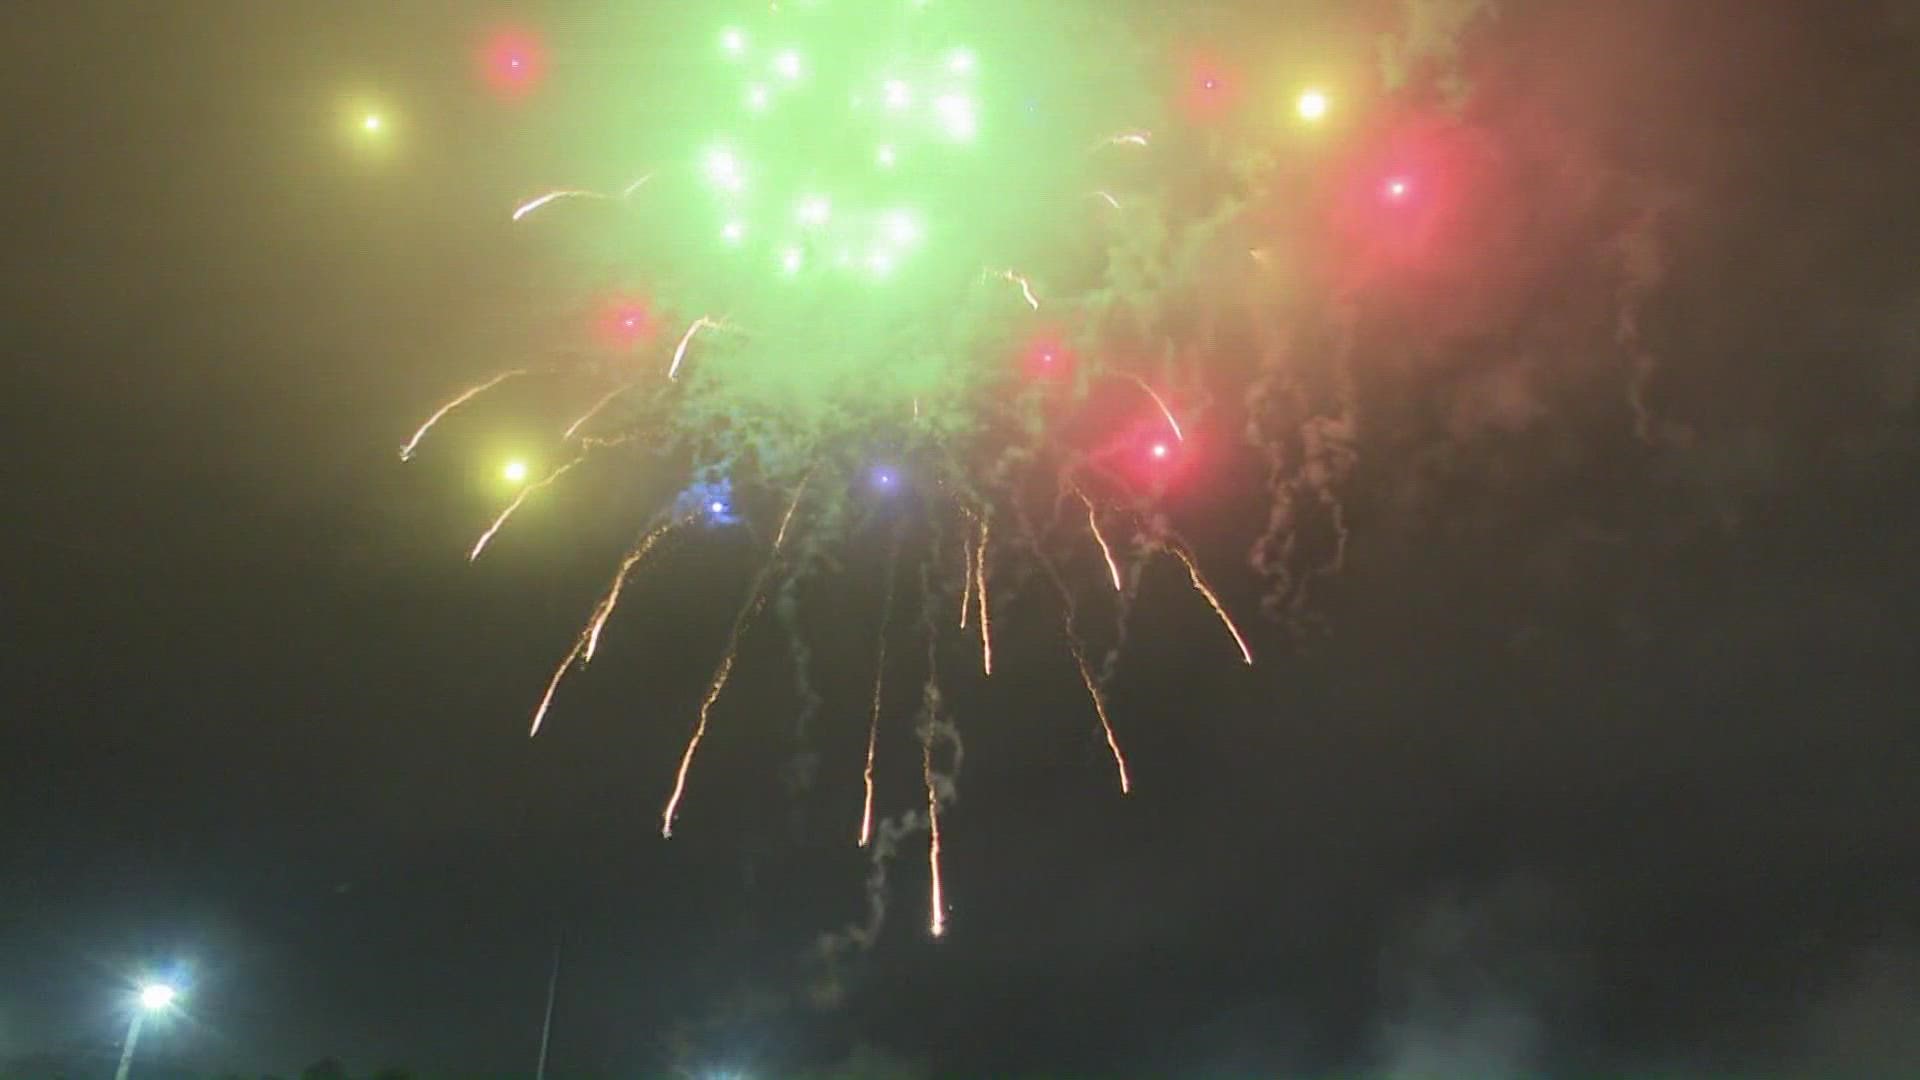 The 2021 Warner Robins Independence Day Celebration came to a close with a big fireworks show